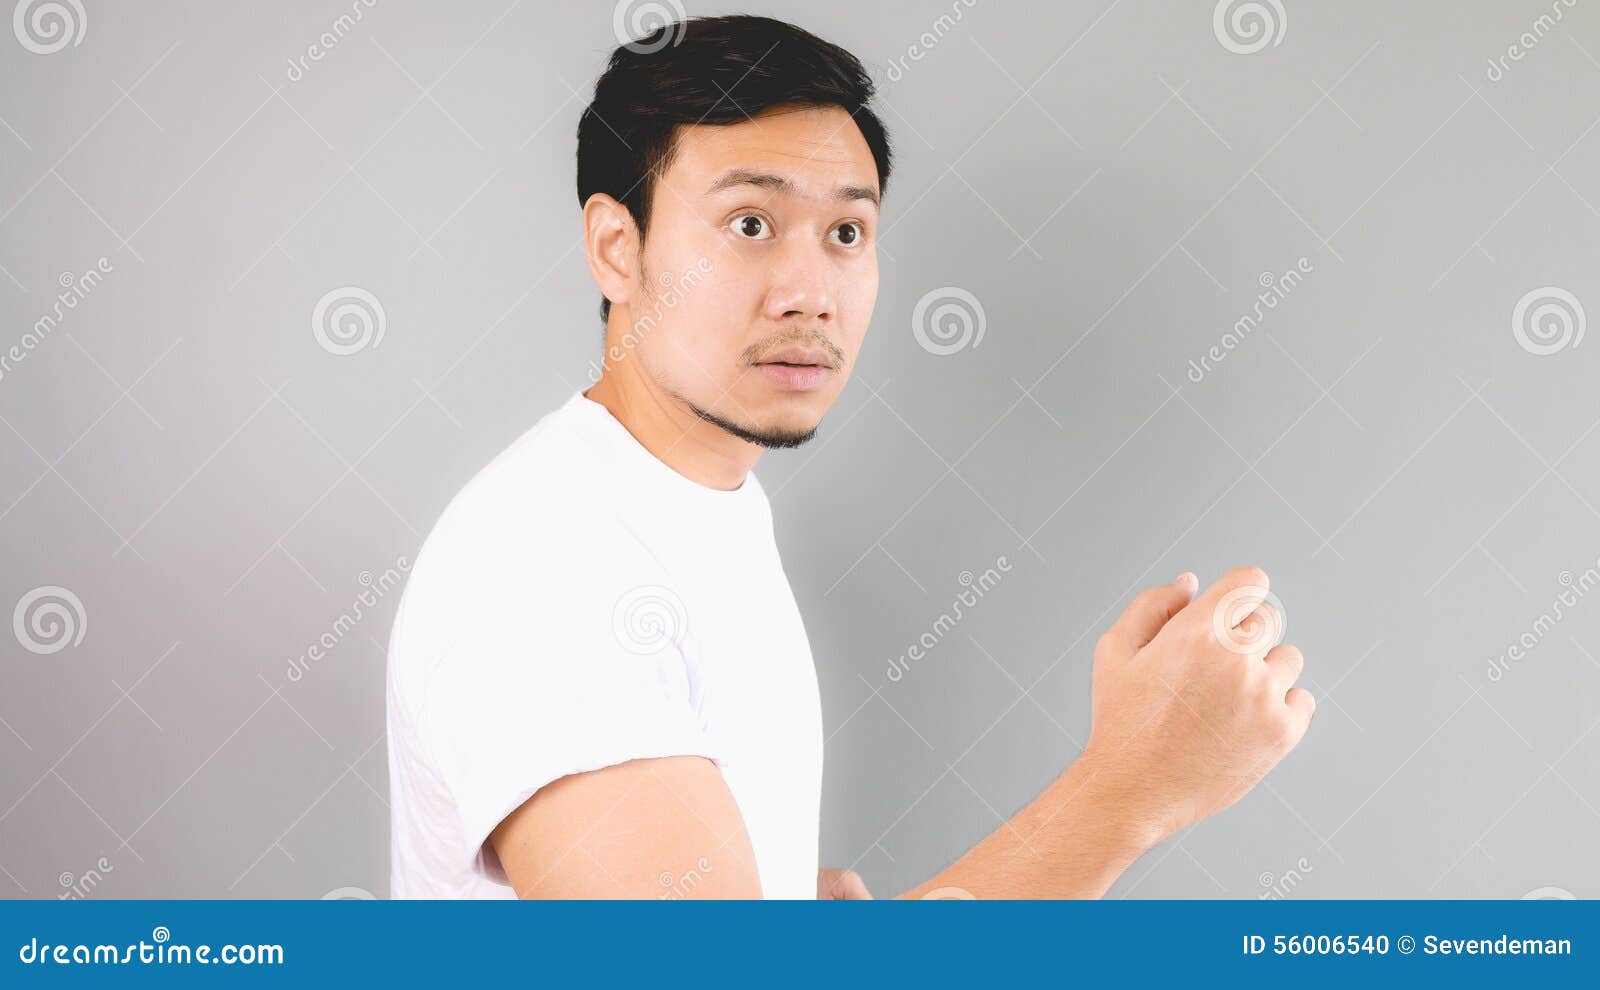 Looking Out As He Accidently Meet Someone. Stock Photo - Image of ...